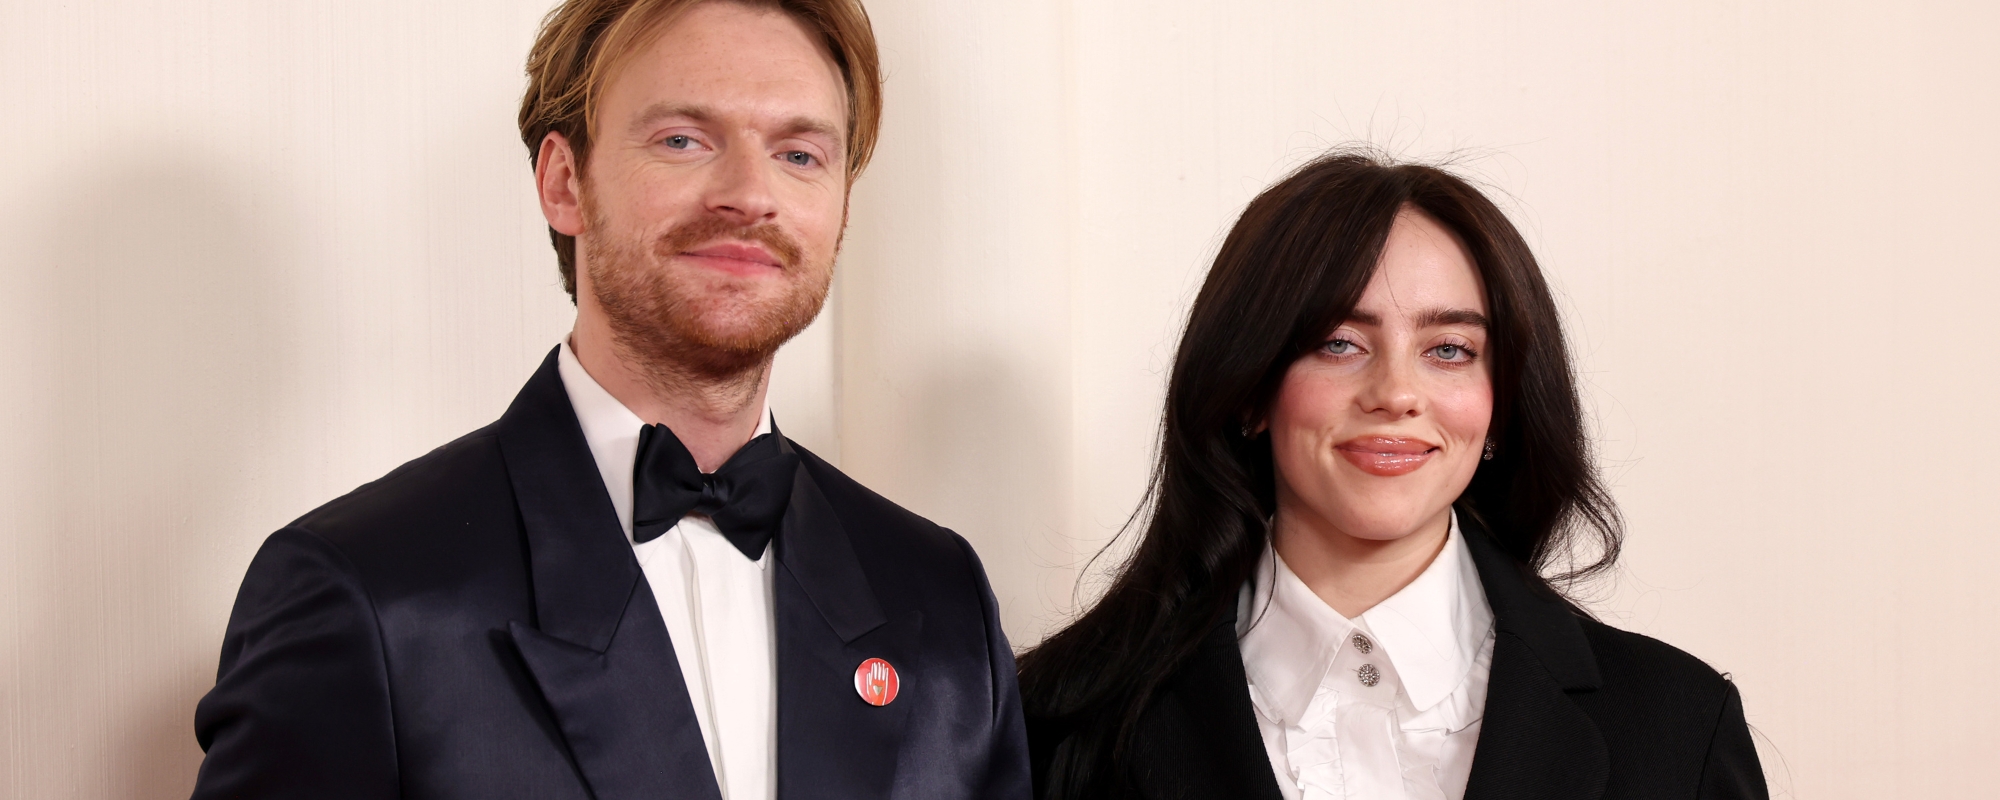 Billie Eilish and Brother FINNEAS Make Oscars History; Dazzle With Heart-Wrenching Performance